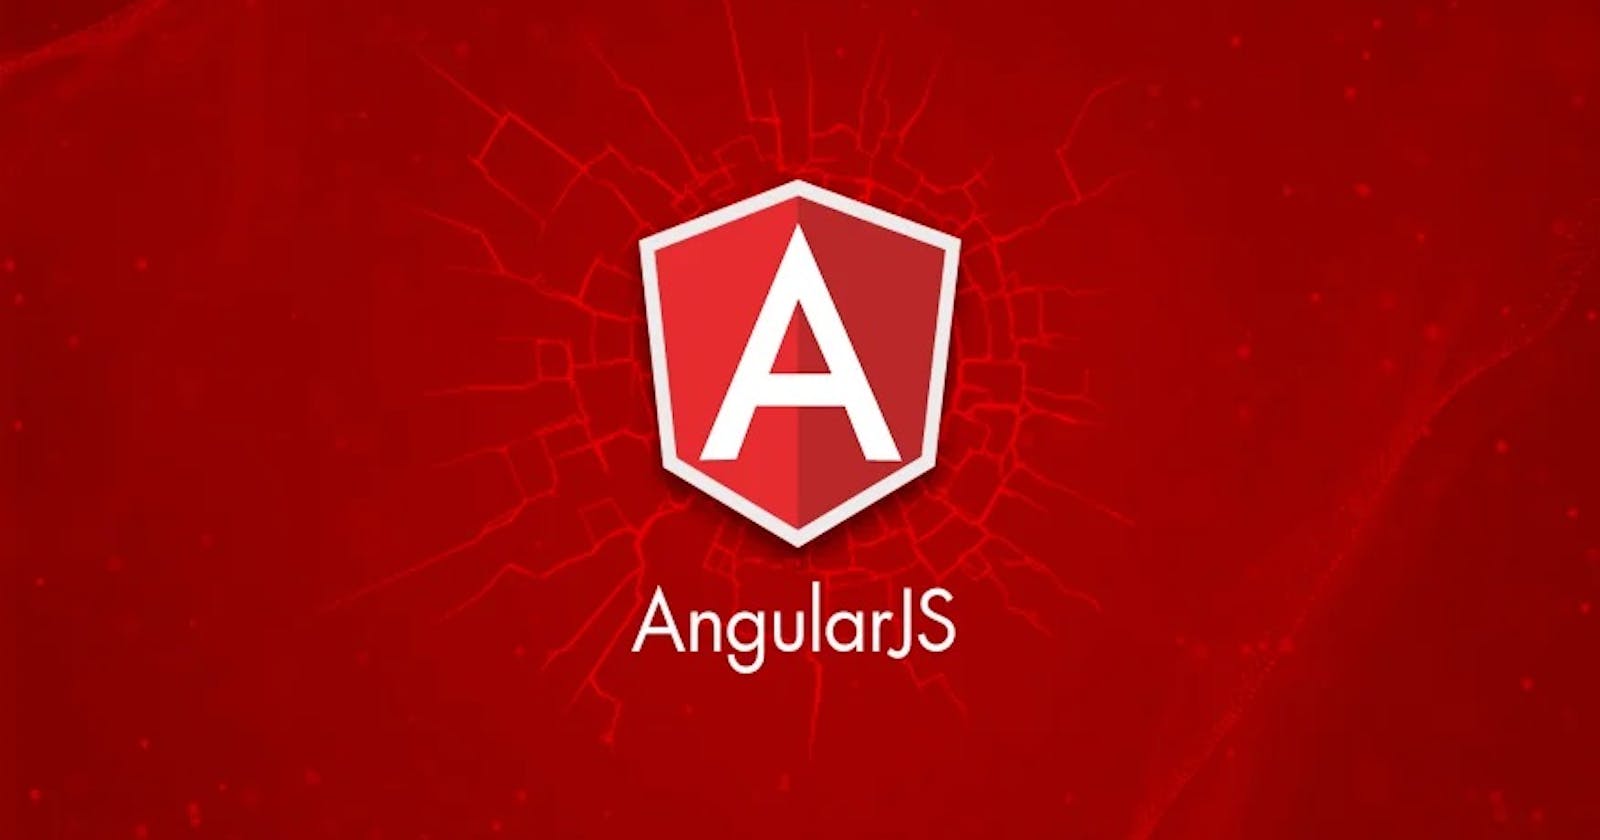 Some Useful Angular Features You've Probably Never Used